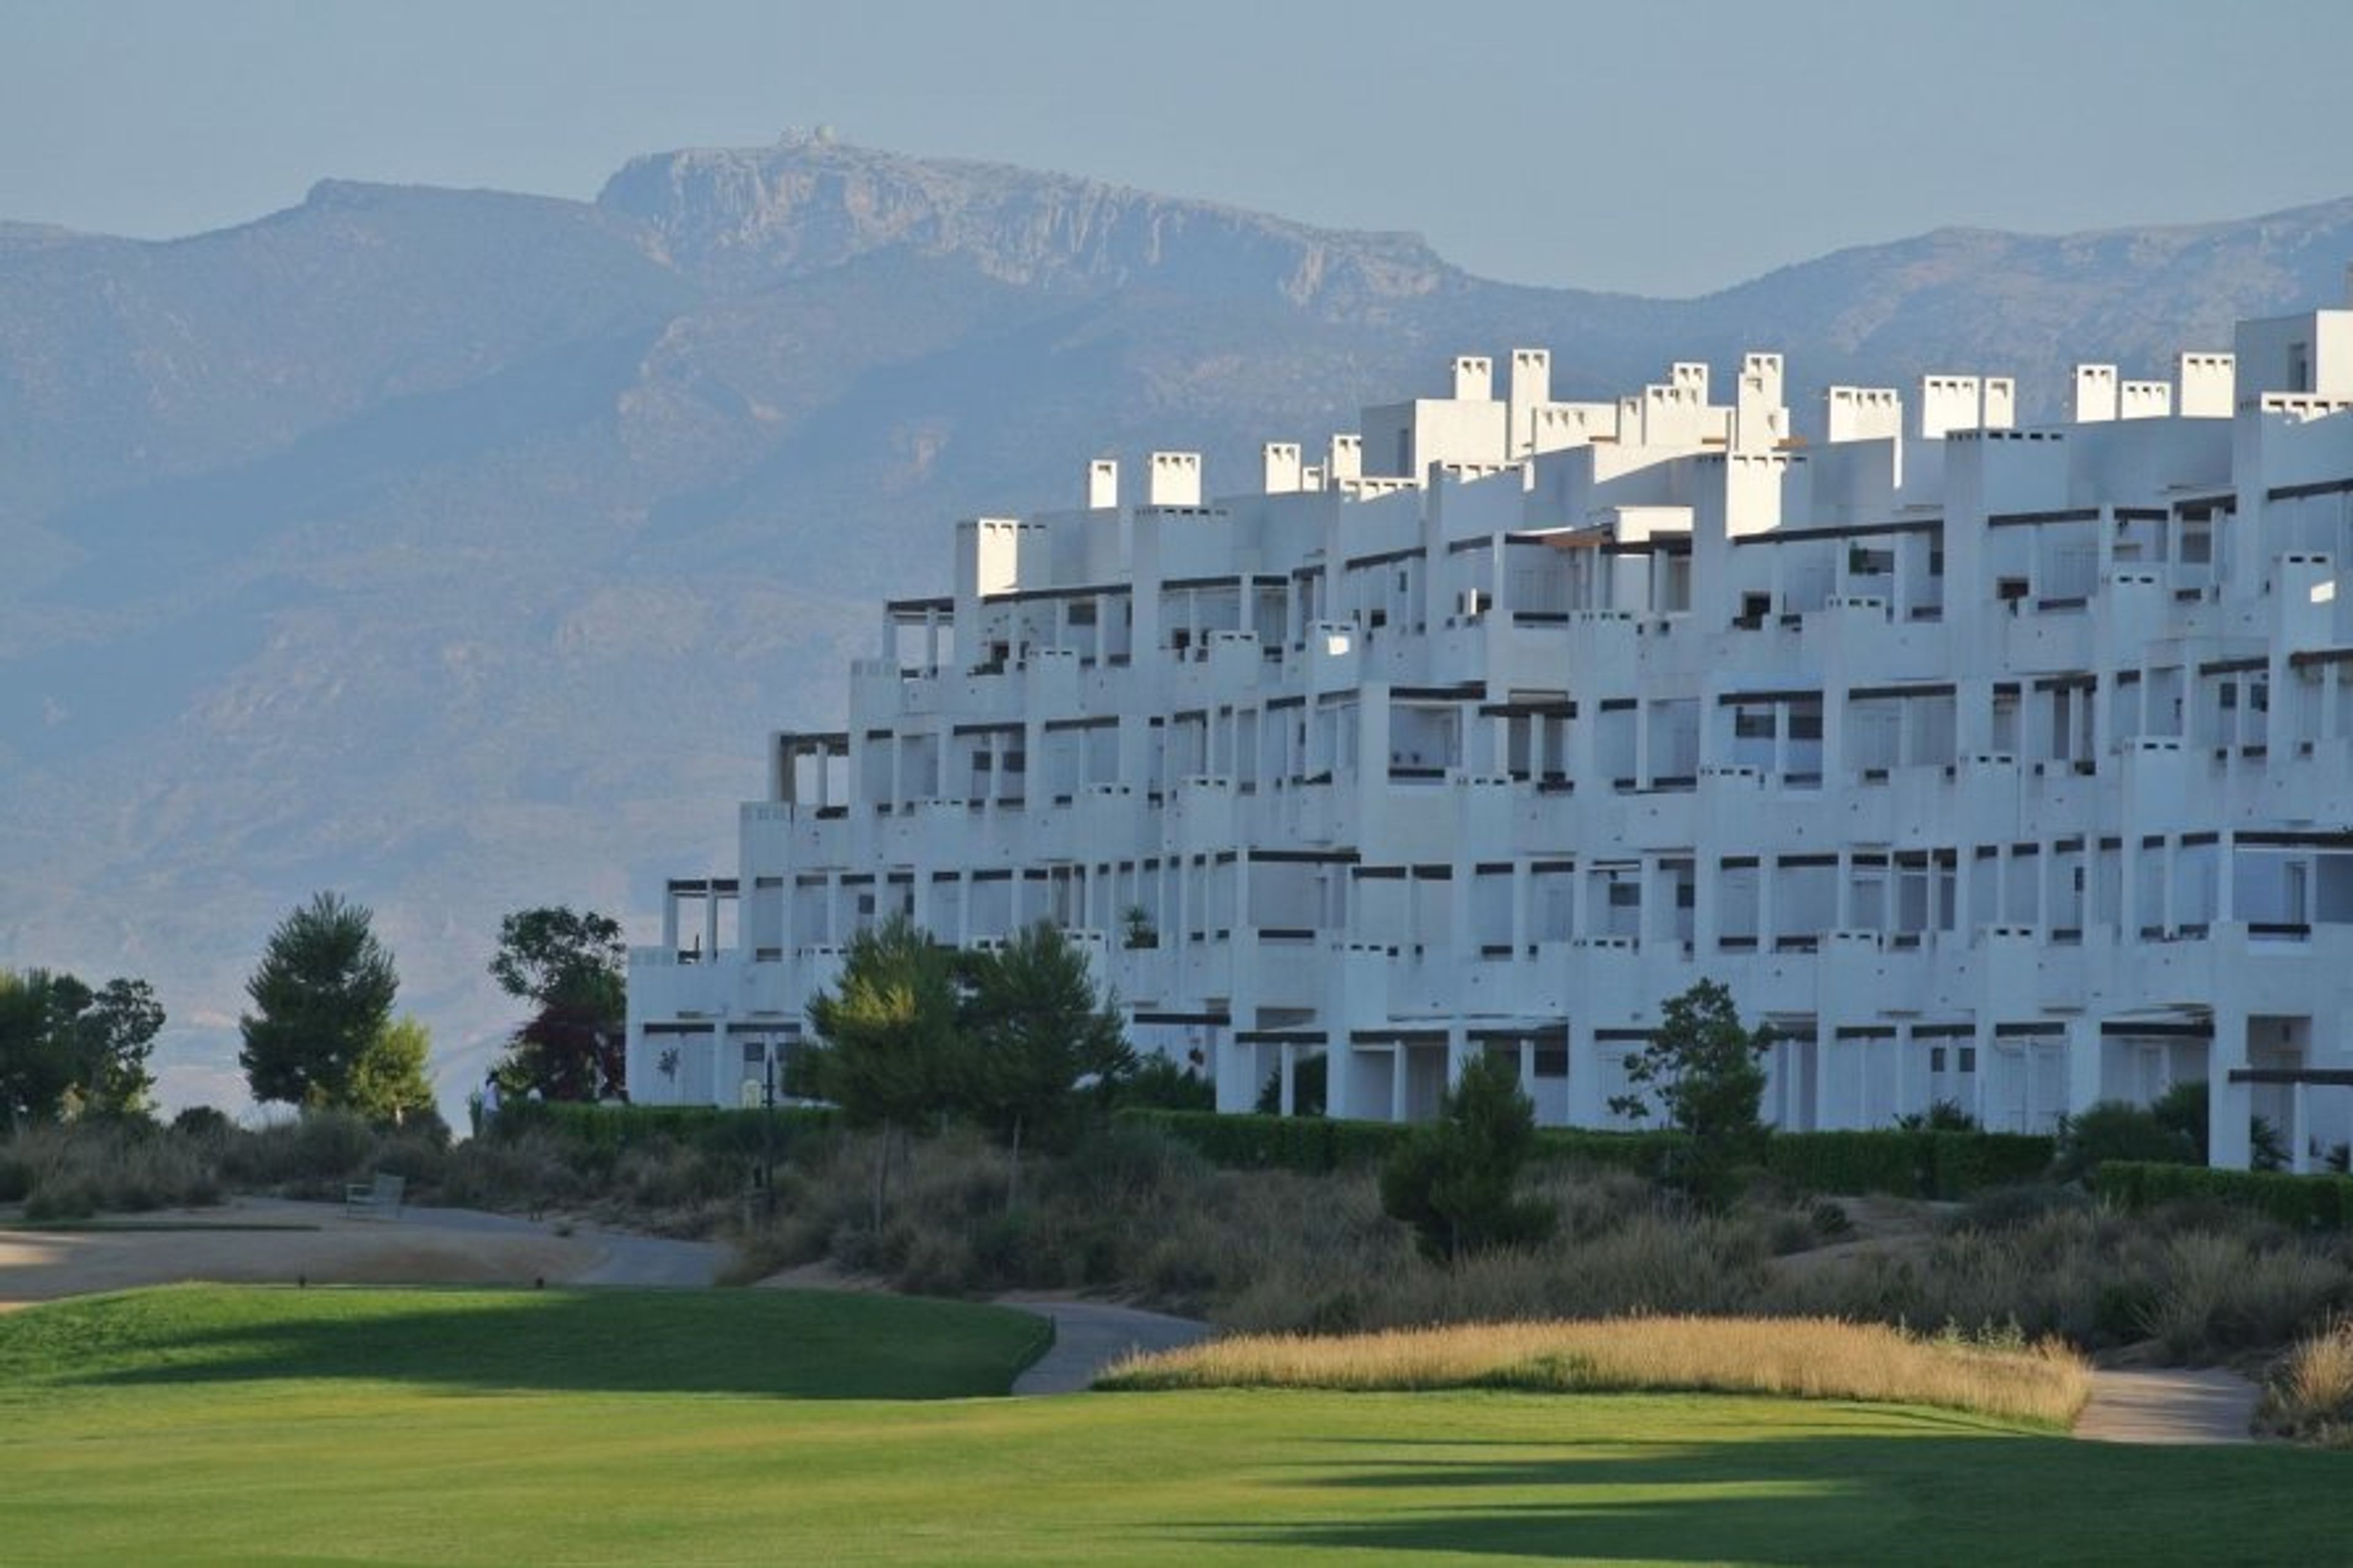 View Penthouses taken from the Golfcourse.